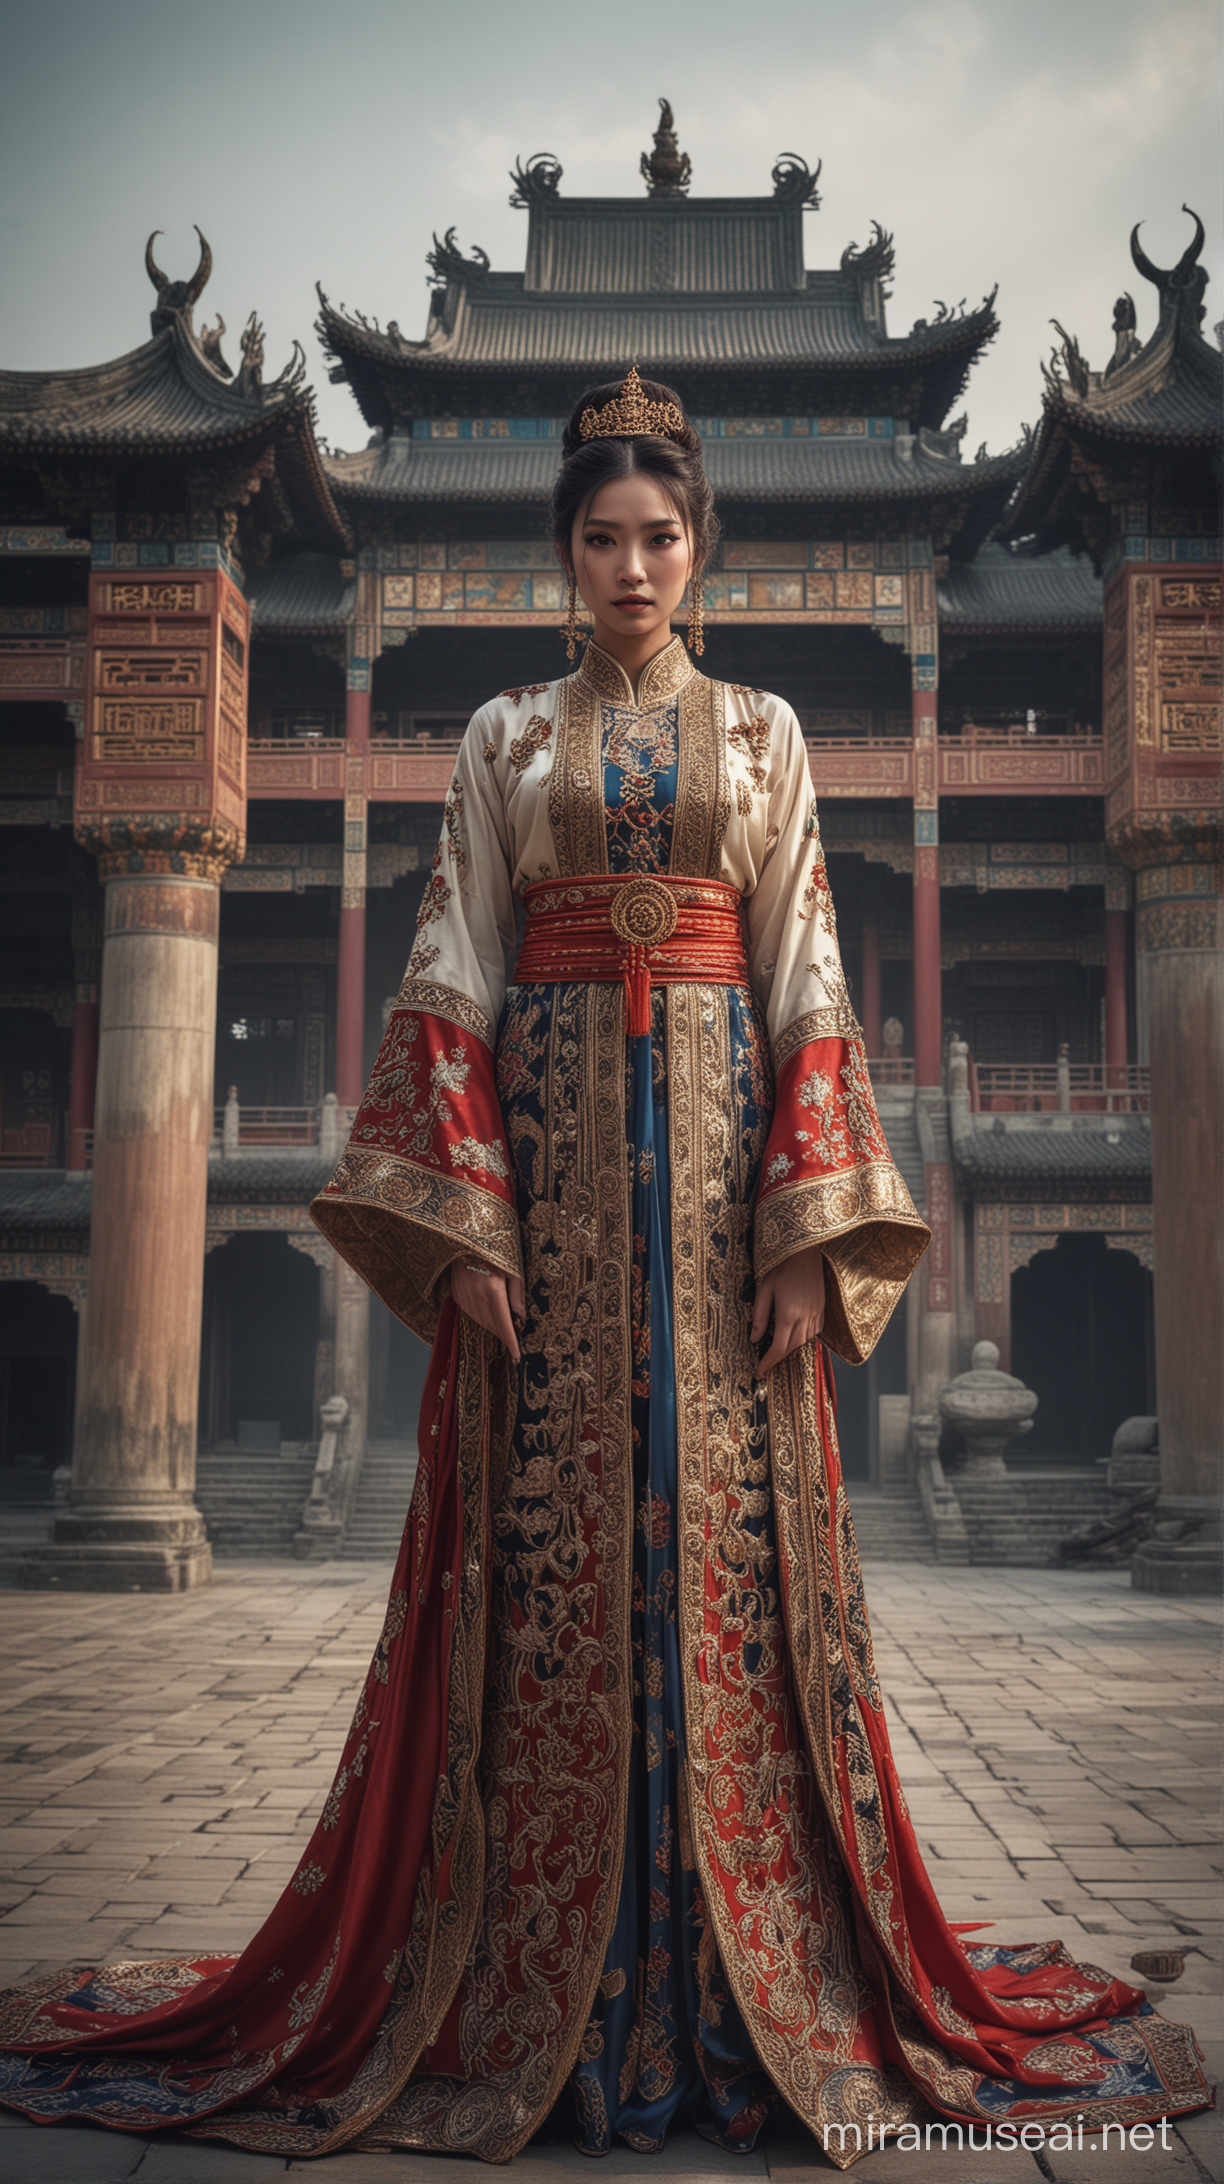 A (((beautiful woman))) dressed in traditional Jinn attire, standing confidently against a (((moody palace backdrop))), with intricate details and ornate structures in China